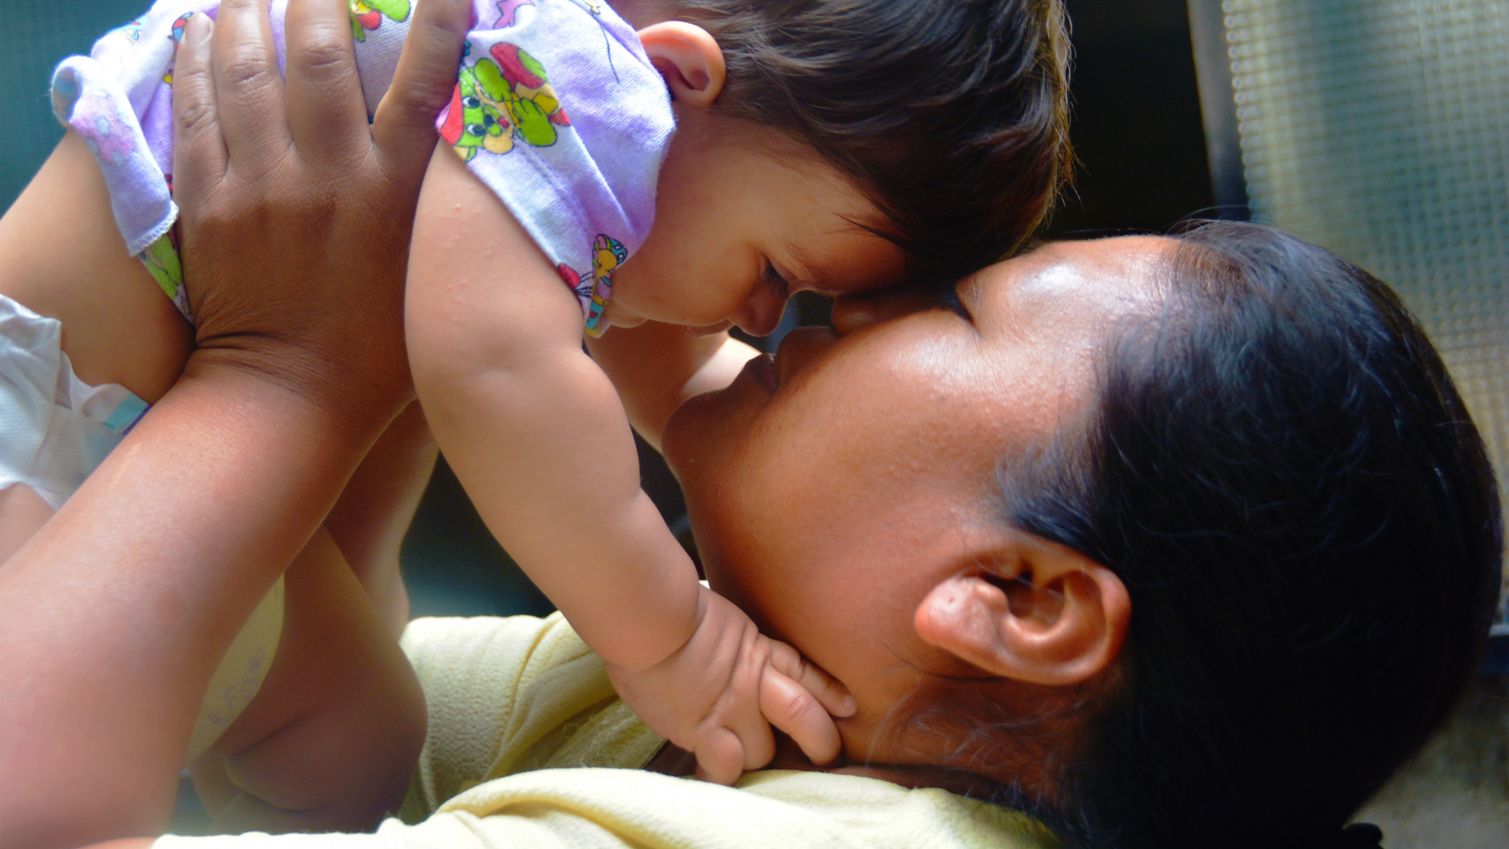 Adult holding child in air while kissing them.